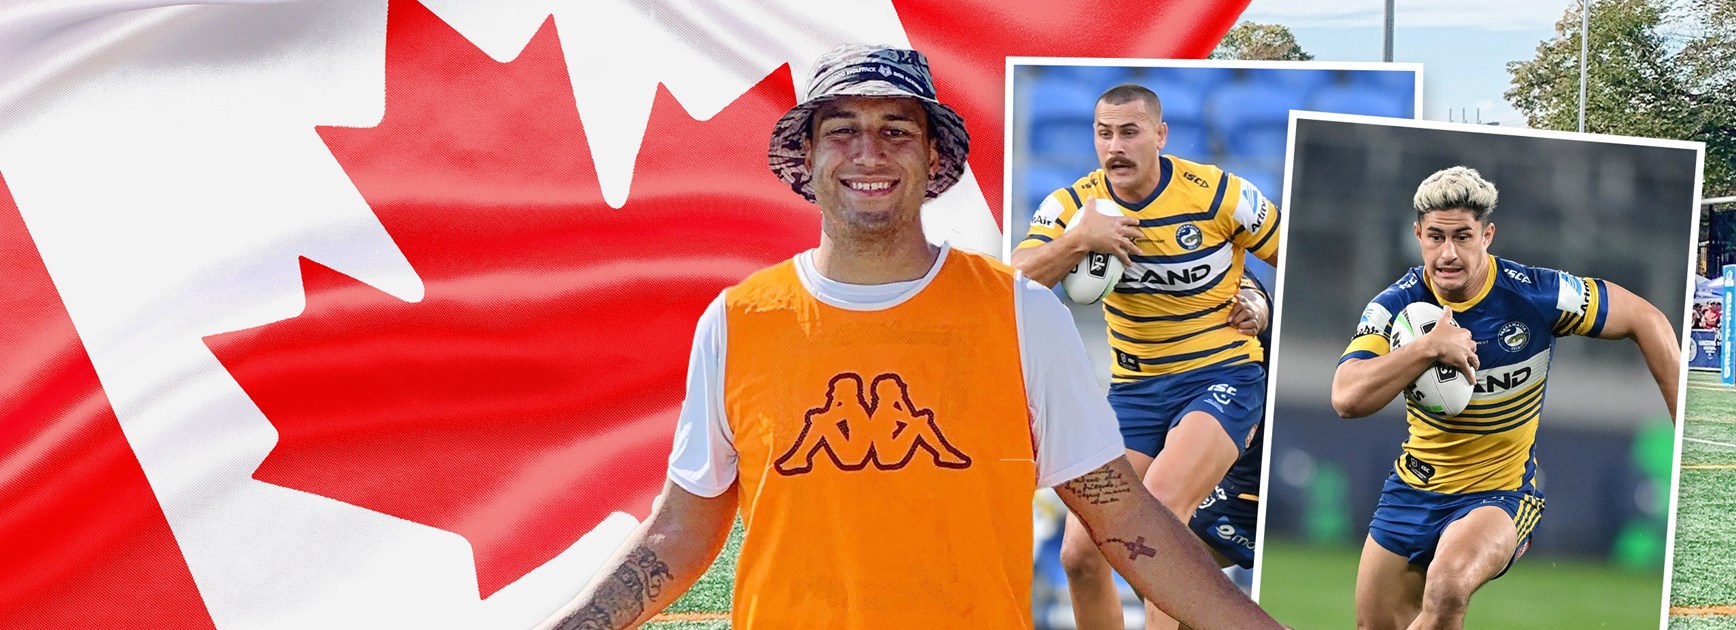 A love letter to rugby league, all the way from Canada